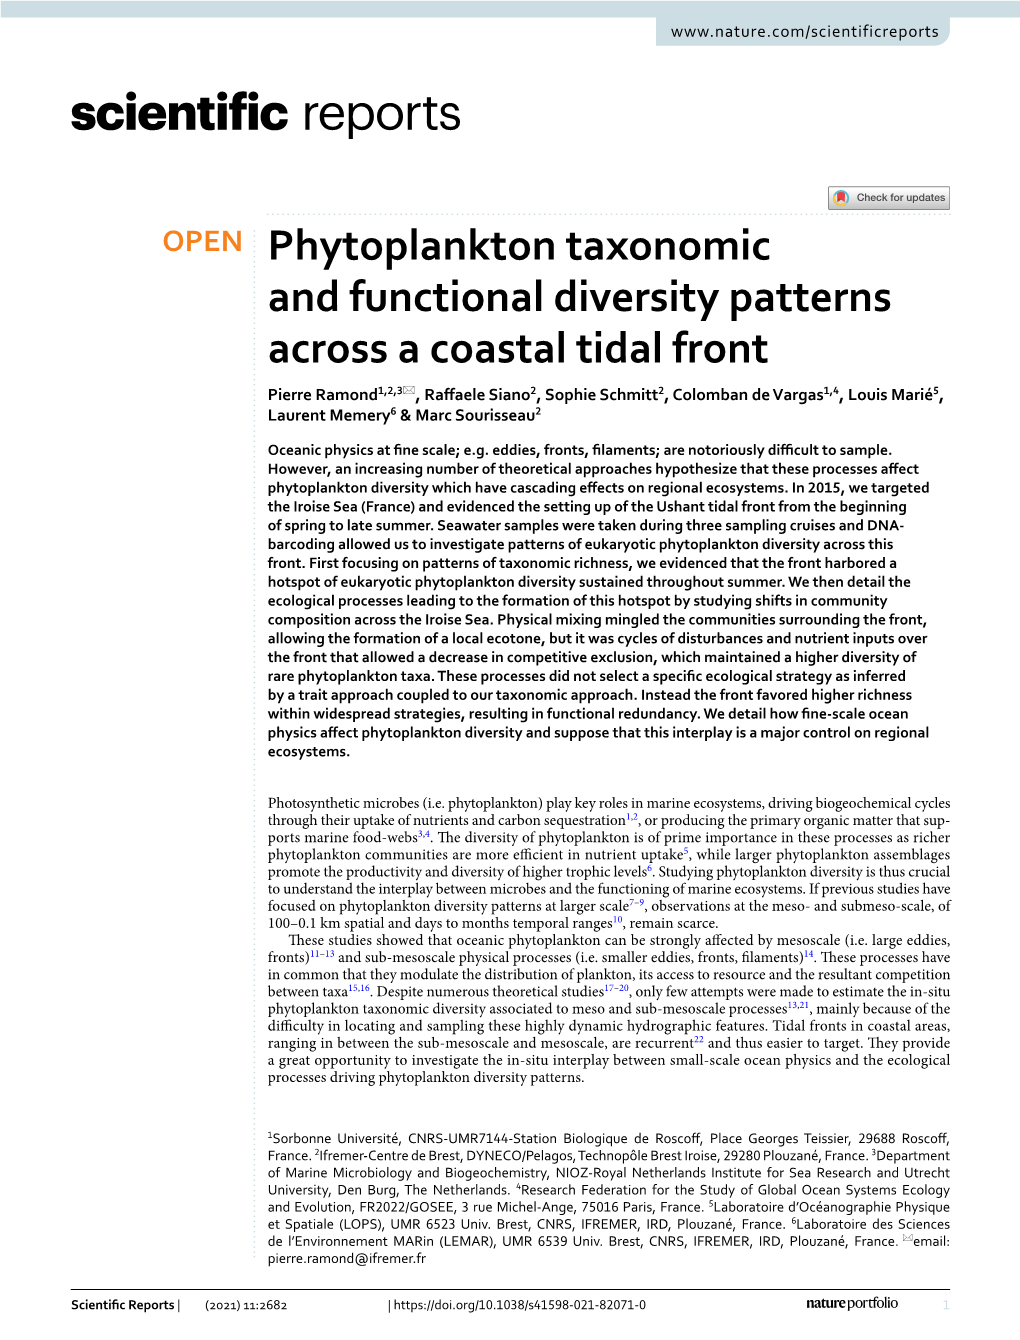 Phytoplankton Taxonomic and Functional Diversity Patterns Across